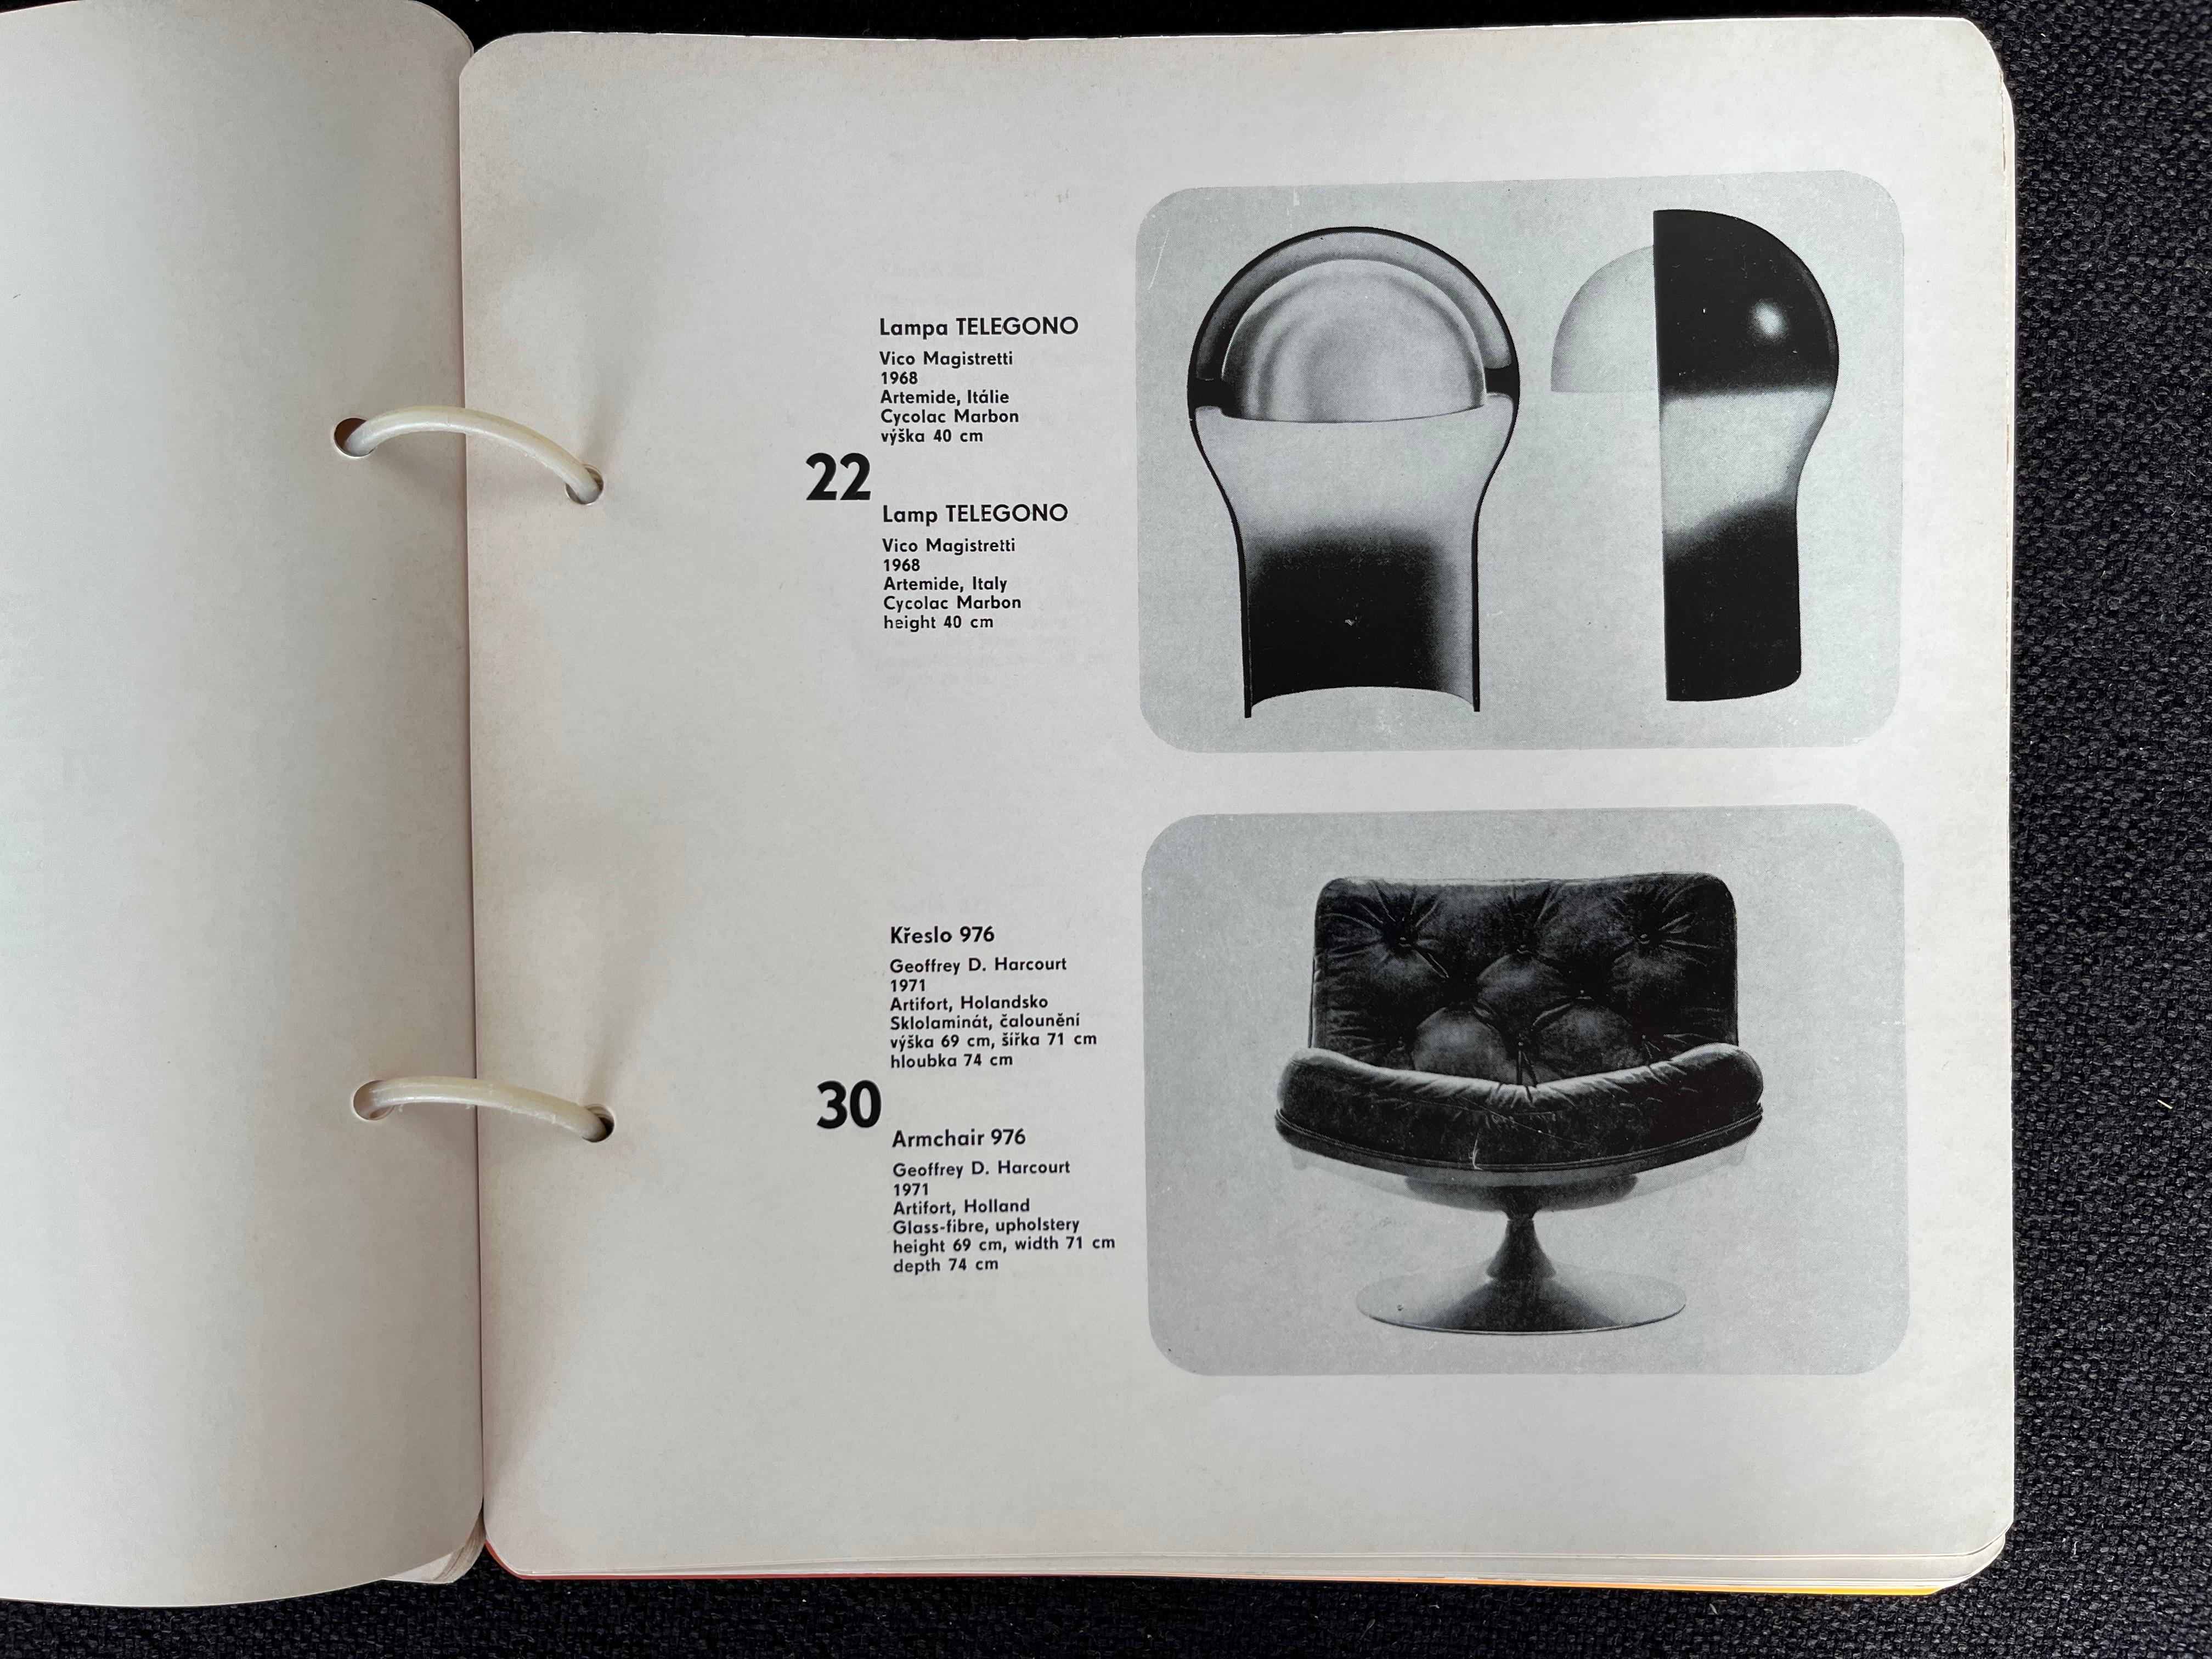 - 1972
- UPM Prahg ( The museum of decorative arts)
- English and Czech language.
- Original condition, see the photos.
- 207 pages.
- Many beautiful pictures of furniture and interior design.
- Gaetano Pesce, Giancarlo Piretti,Olivier Morgue,